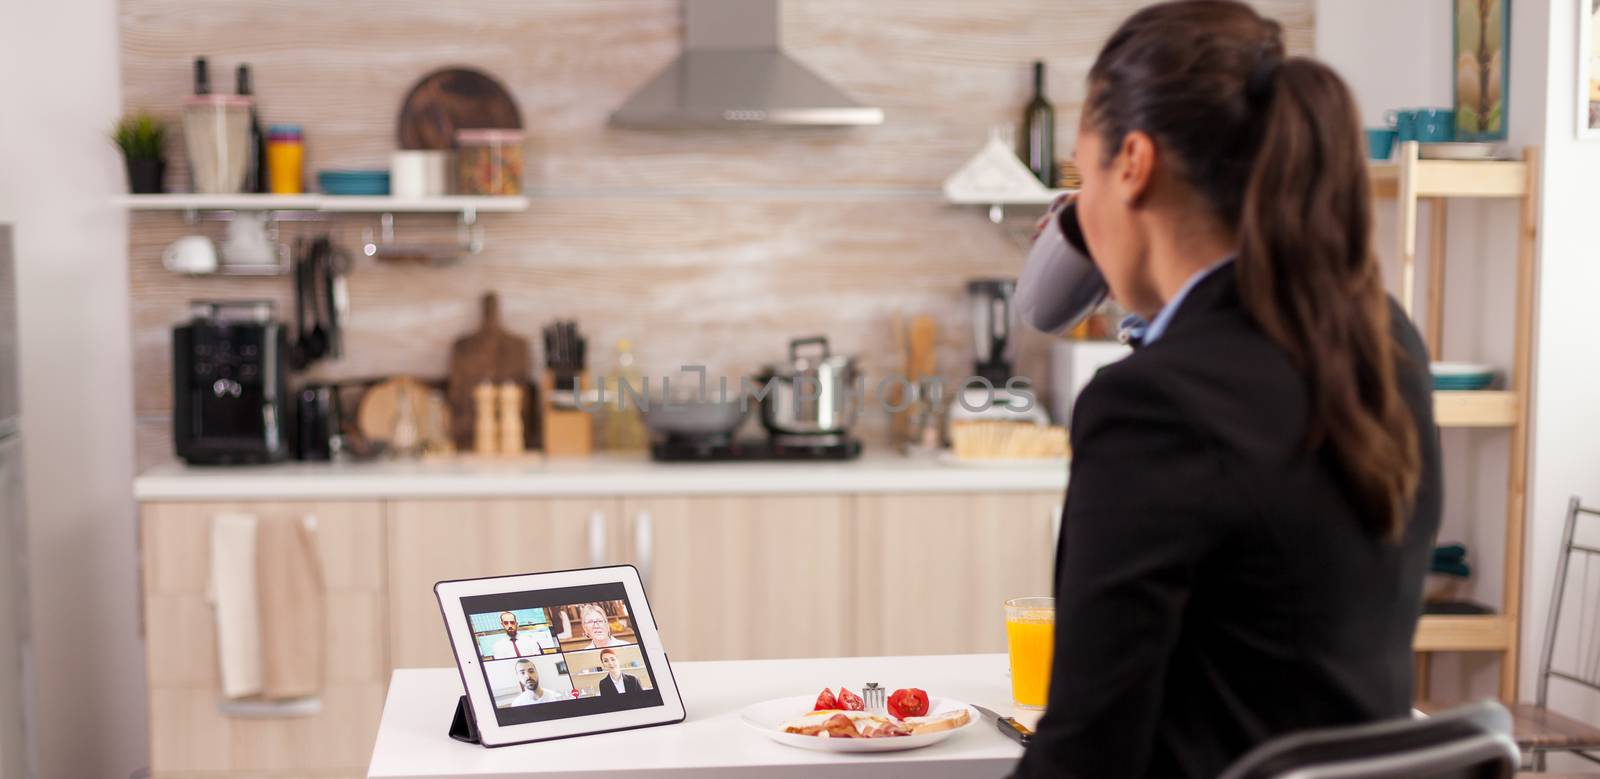 Business woman using smart device while eating breakfast in kitchen. Young freelancer at home talking on a video call with her colleagues from the office, using modern internet technology